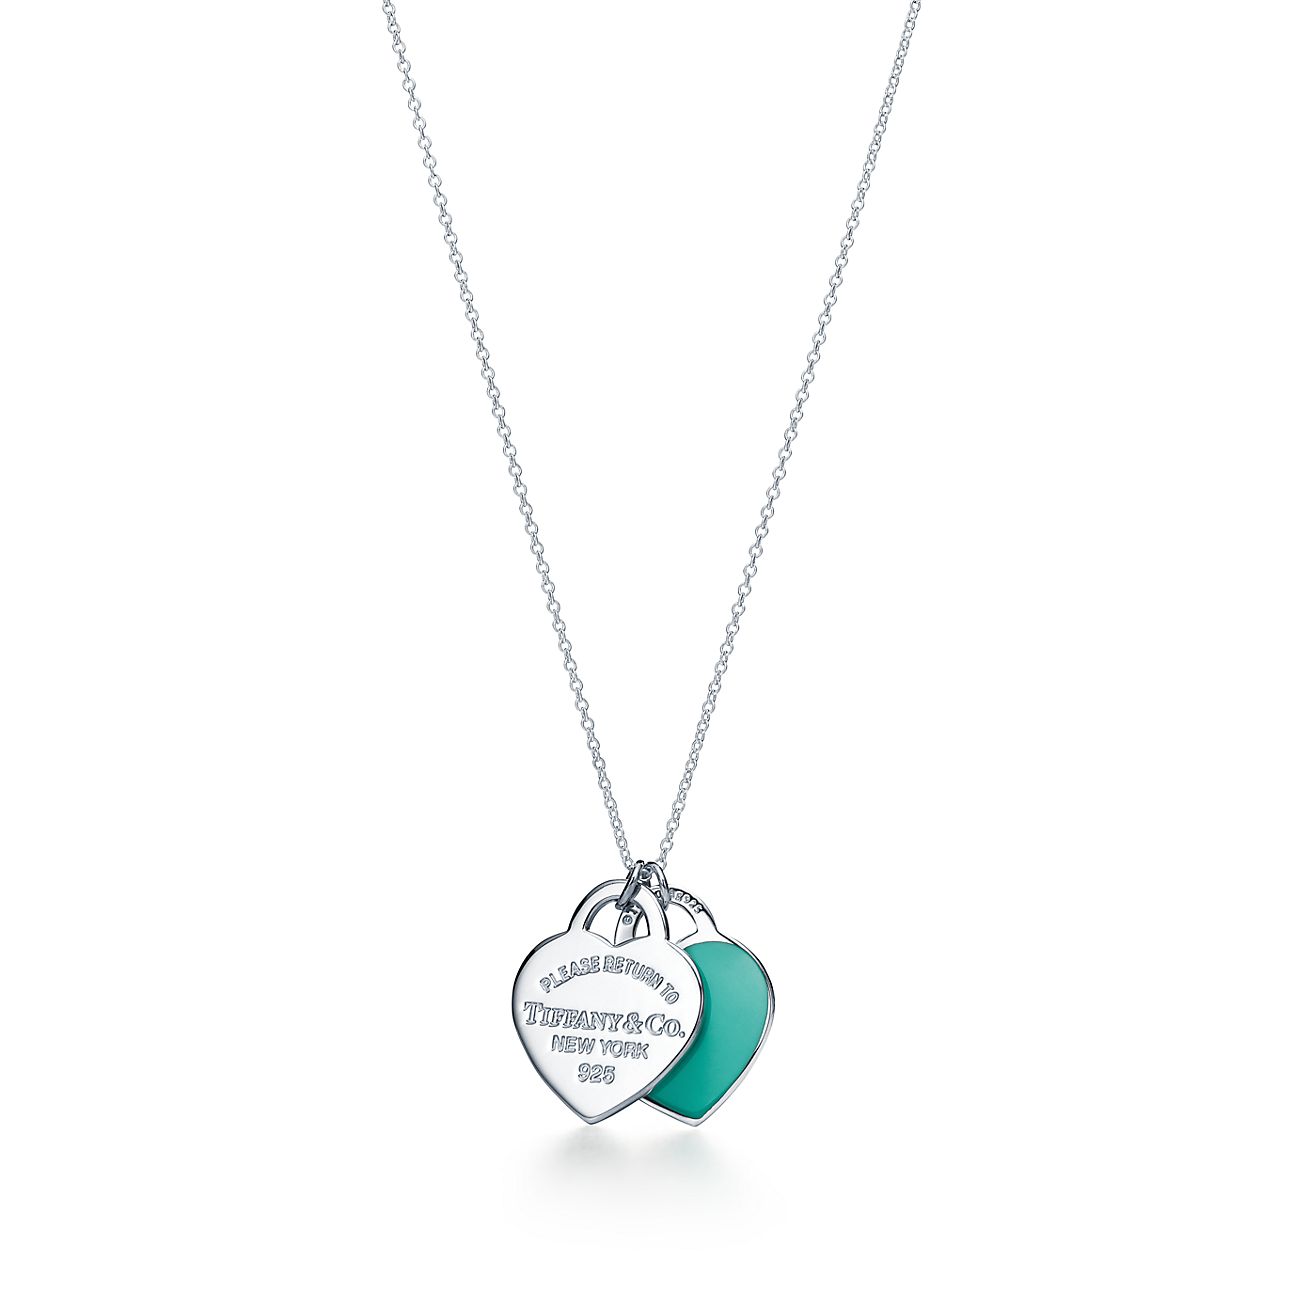 Femme Femme Collier TIFFANY & CO Colliers Tiffany & Co Femme Colliers Tiffany & Co Femme Joaillerie Tiffany & Co argenté Femme Colliers & Pendentifs Tiffany & Co Femme Bijoux & Montres Tiffany & Co 